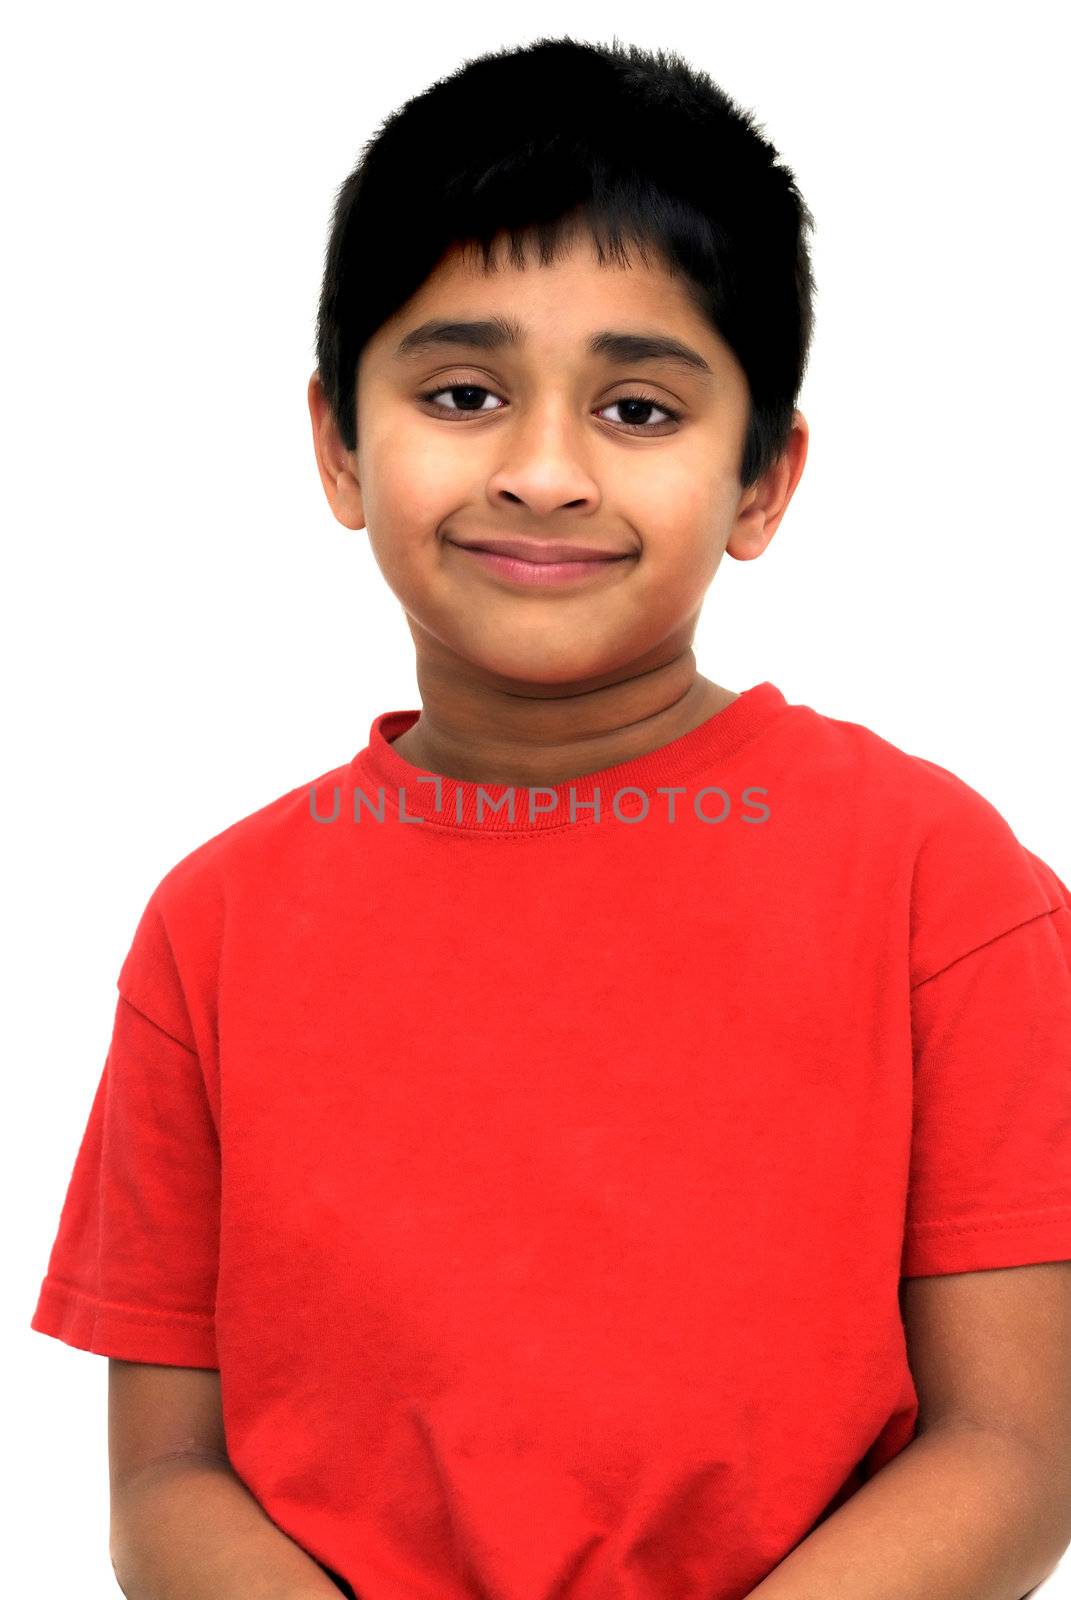 An handsome Indian kid posing for a portrait